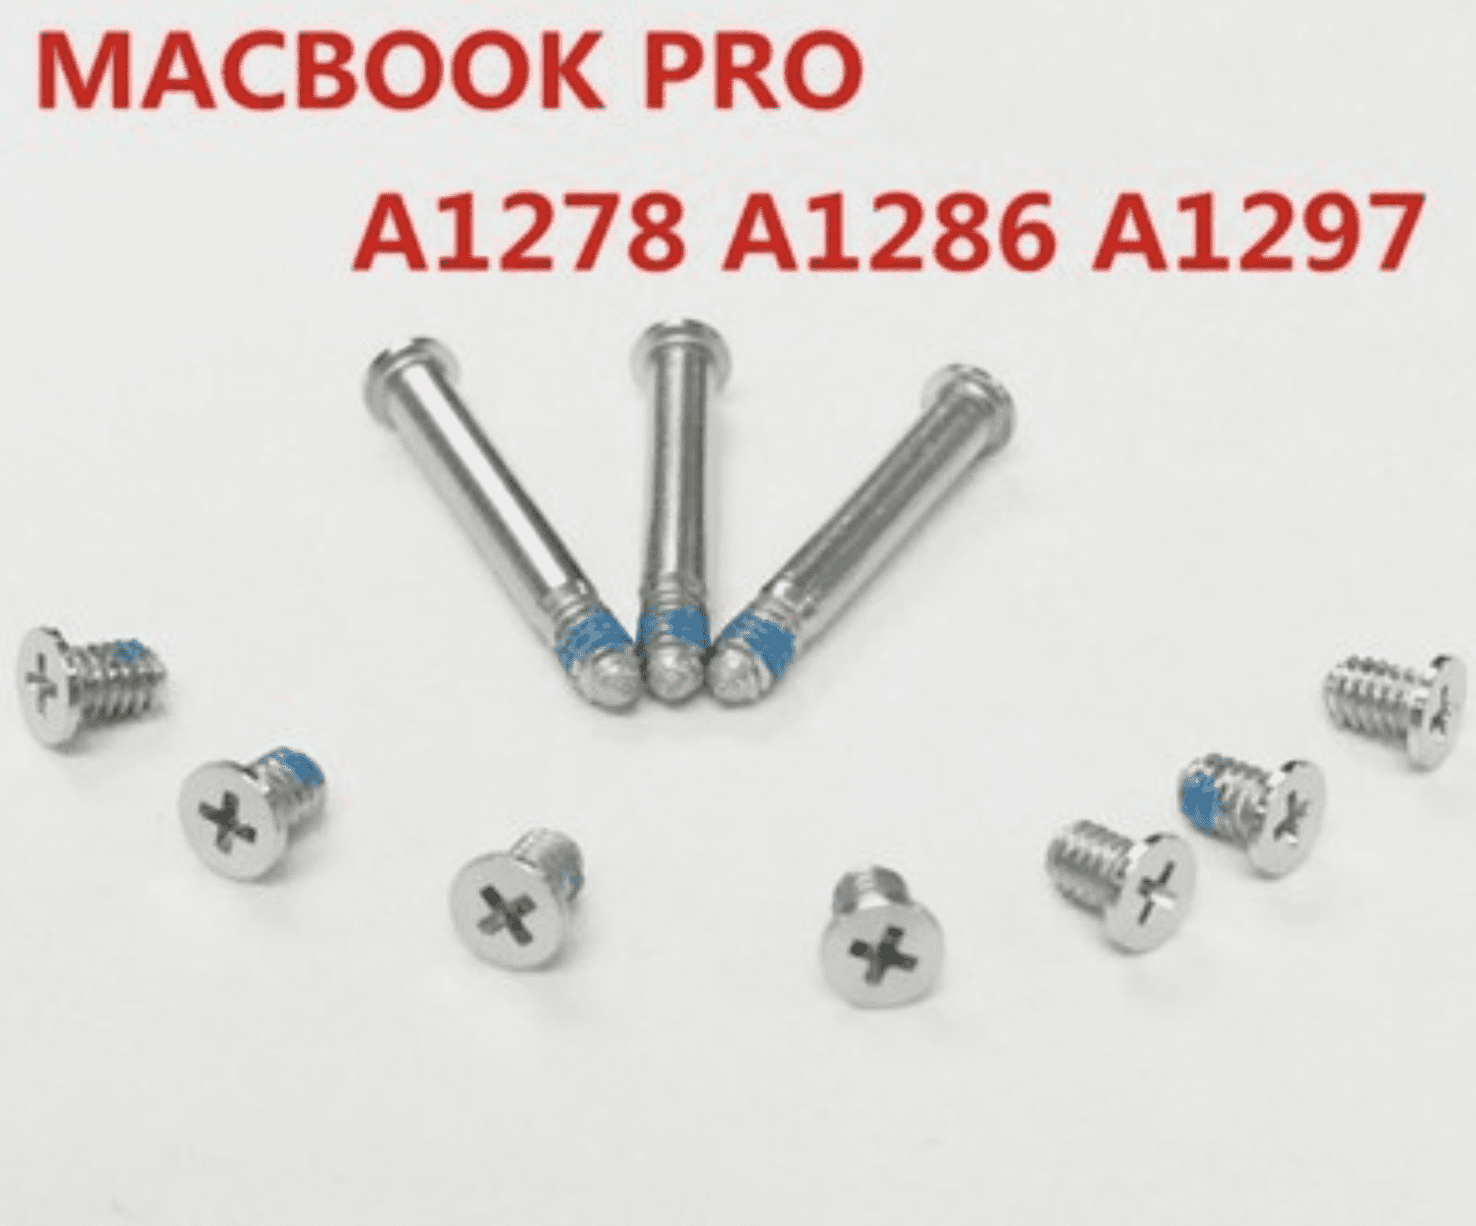 HXHLWN 2 Sets Replacement Screws with Screwdriver for Apple MacBook Pro 13 15 17 A1278 A1286 A1297 2009-2012 